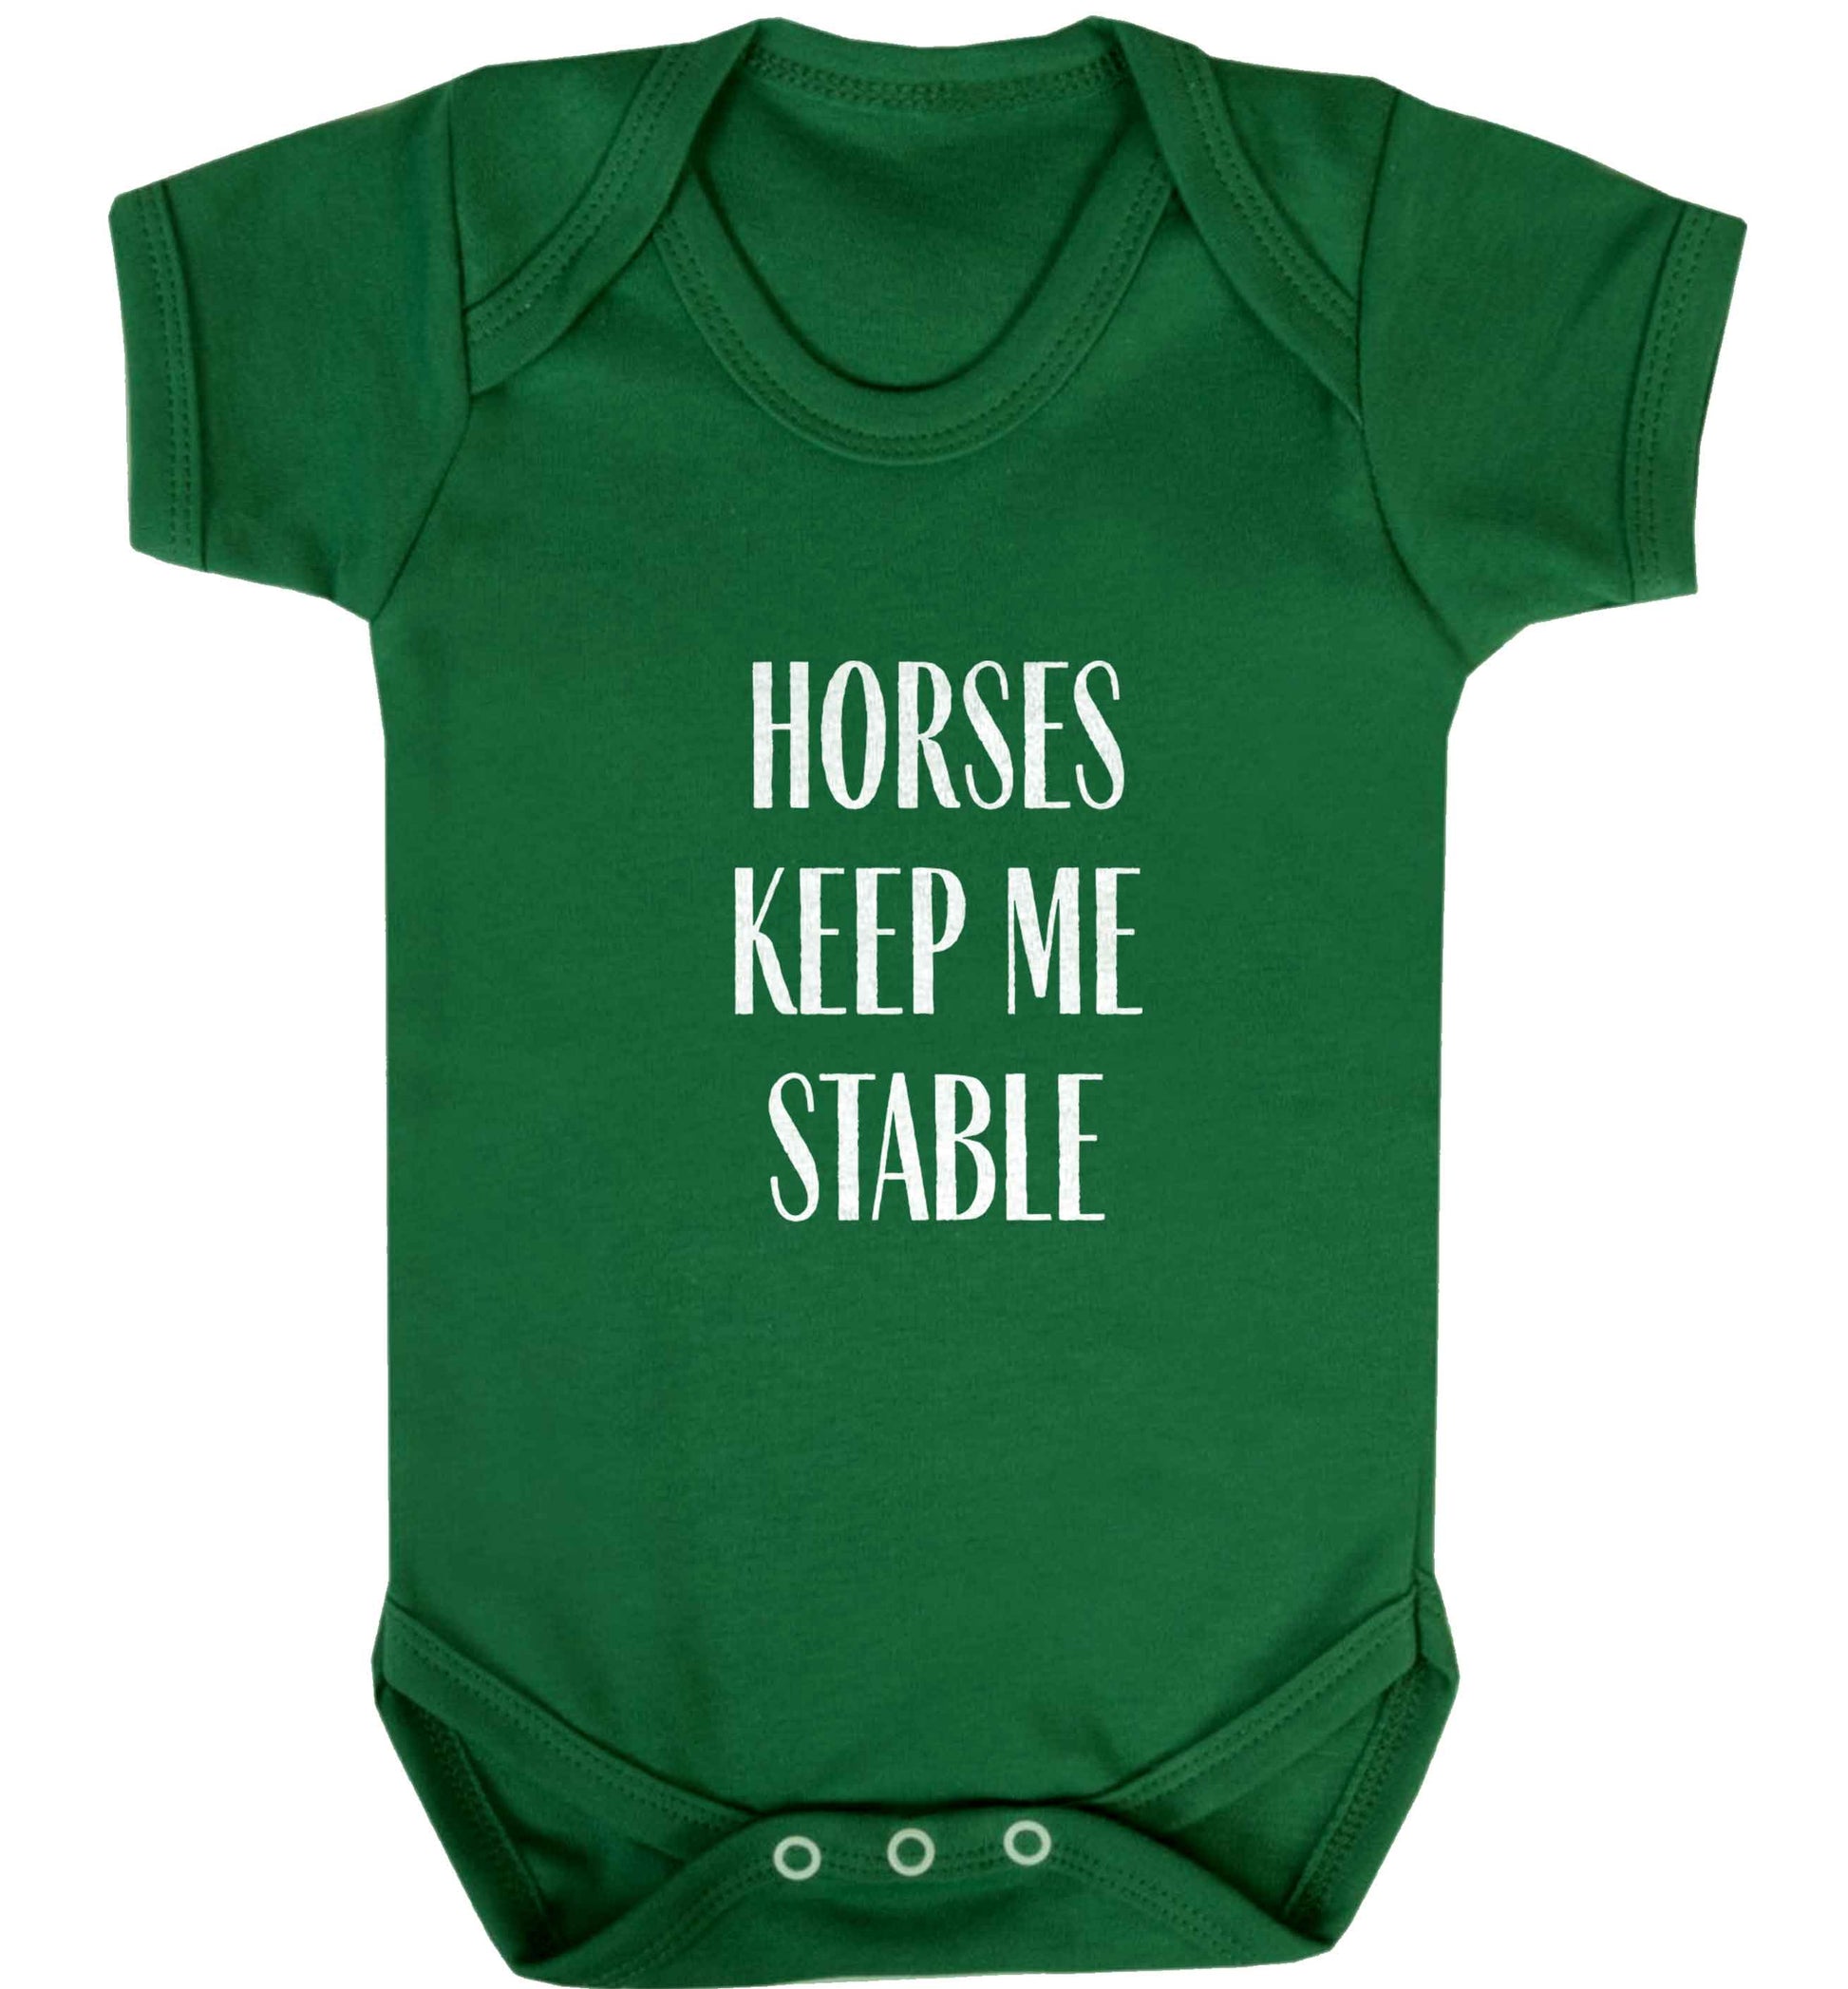 Horses keep me stable baby vest green 18-24 months